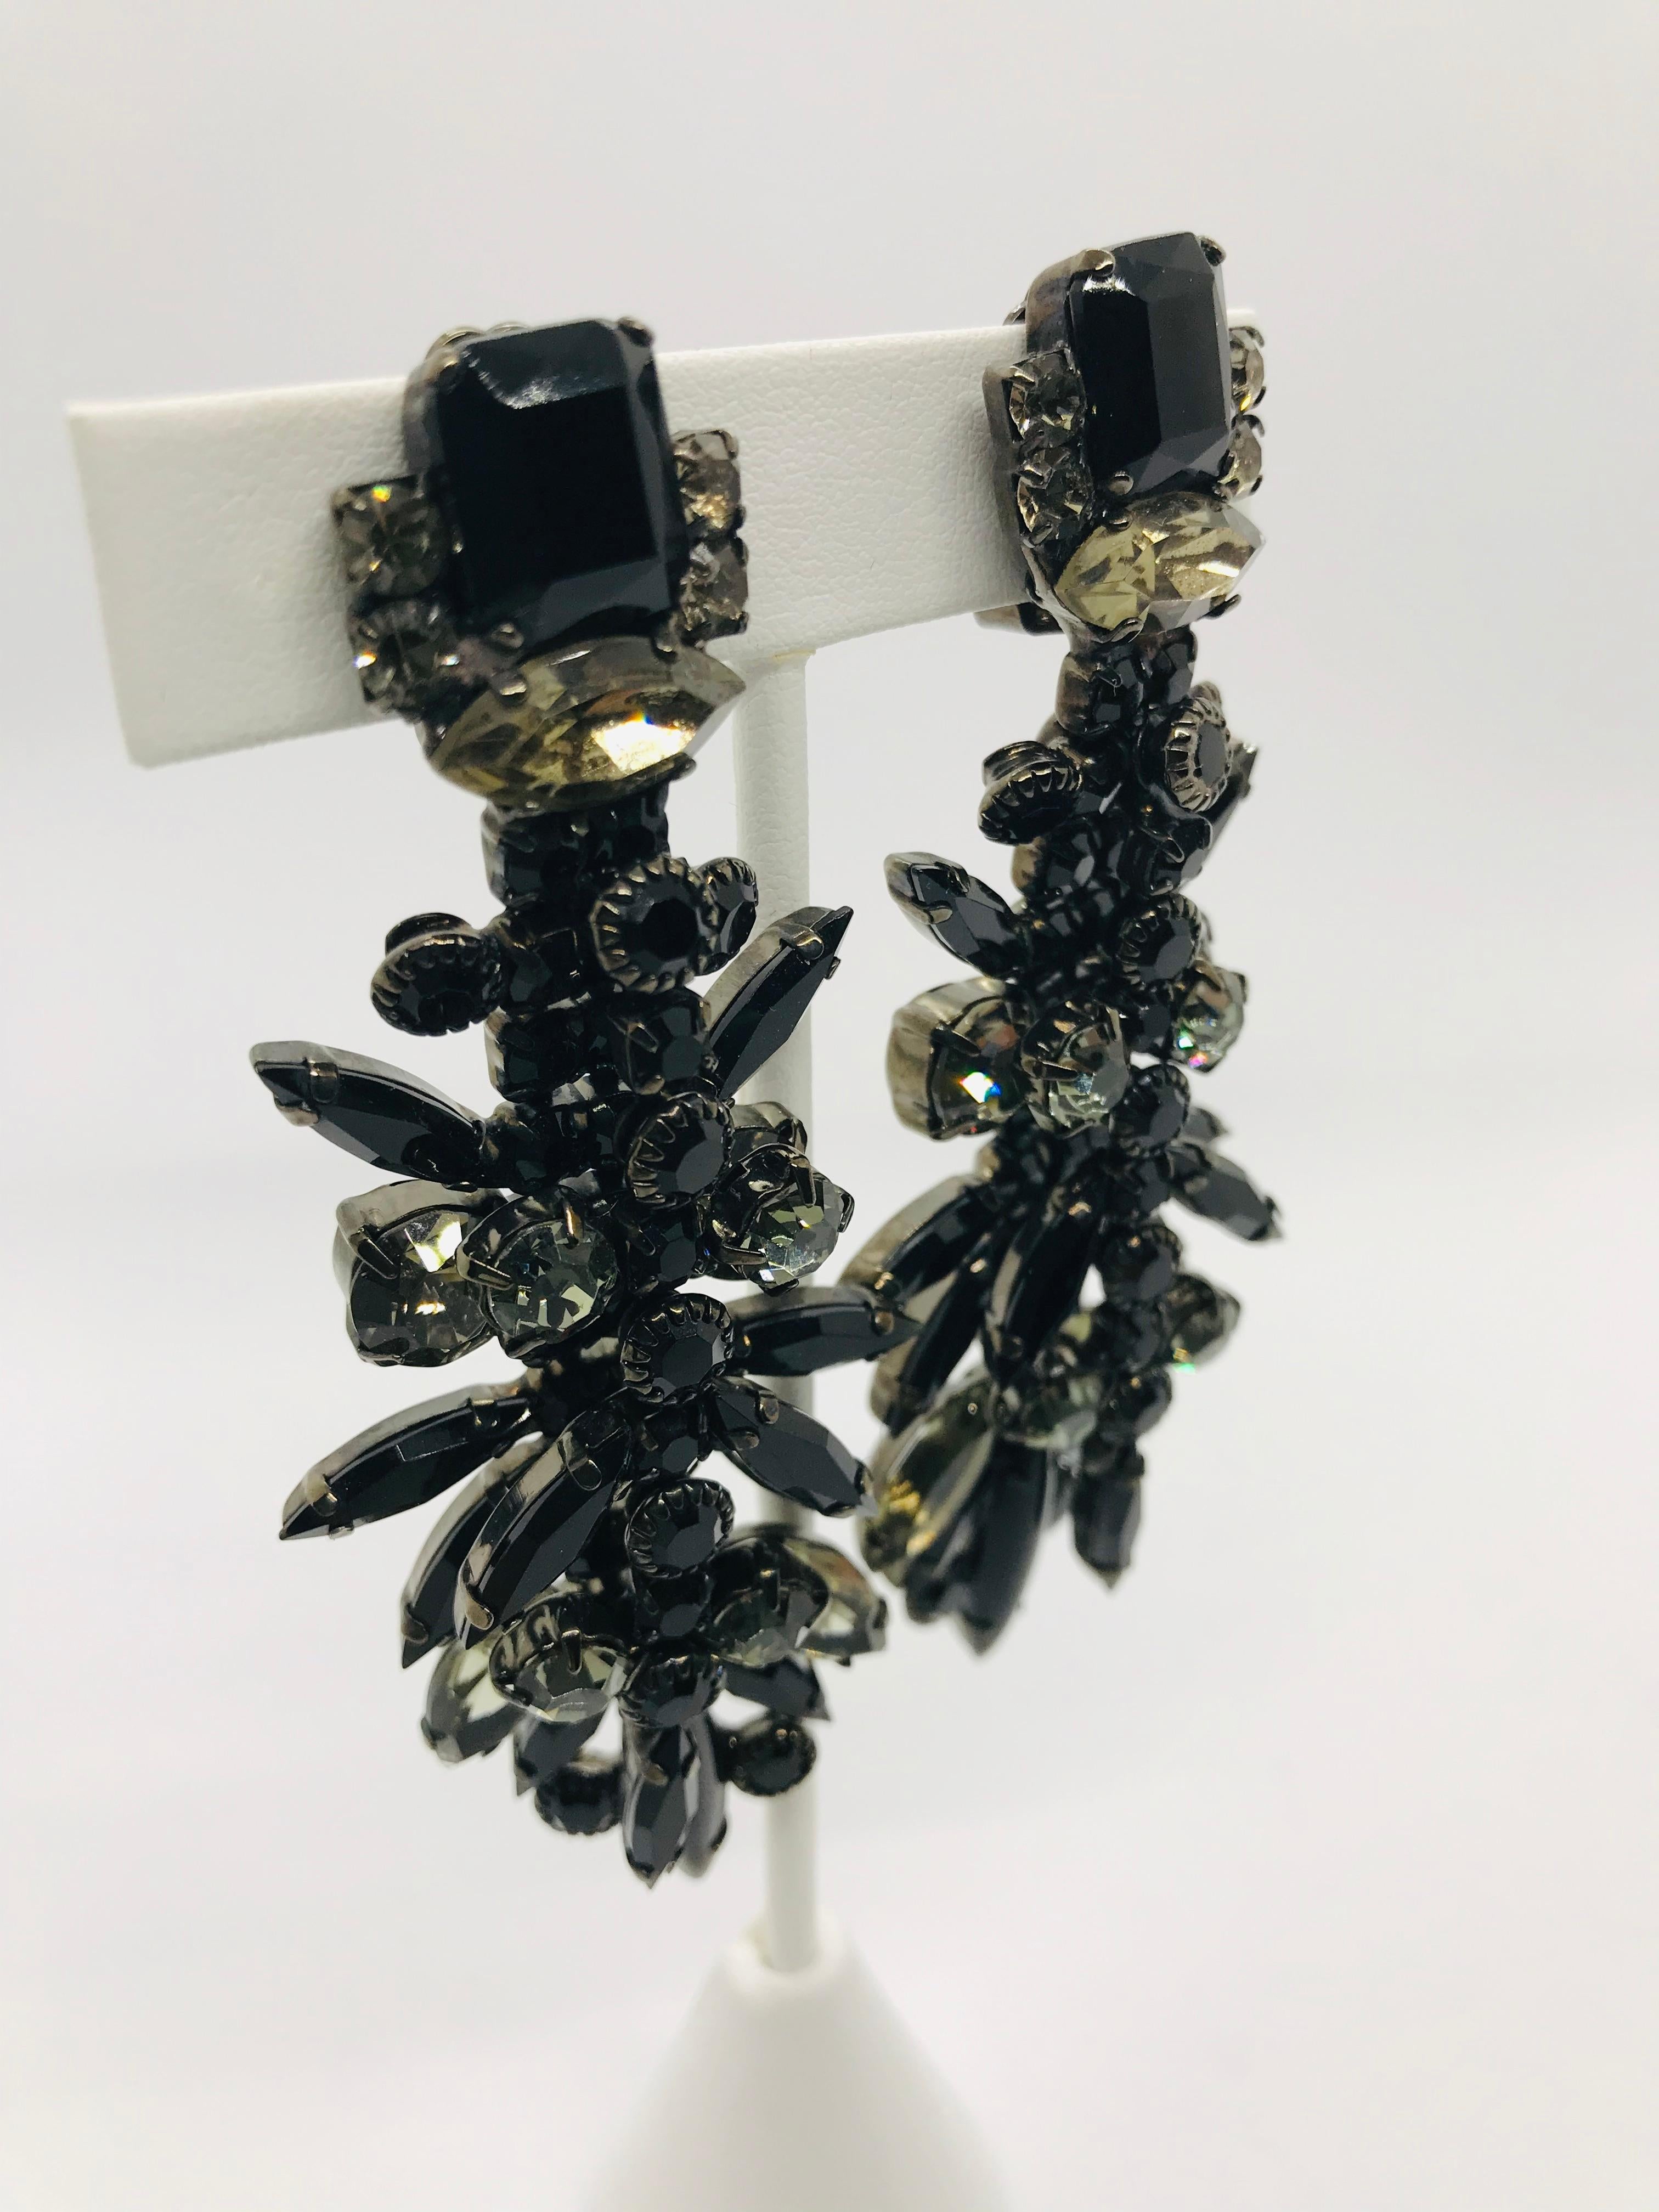 These elegant and dramatic black jet and black diamond vintage 1960s Austrian crystal chandelier earrings are sure to add a glamourous touch to any look!  These chandelier earrings are double layered for extra movement and glitter.  The earrings are